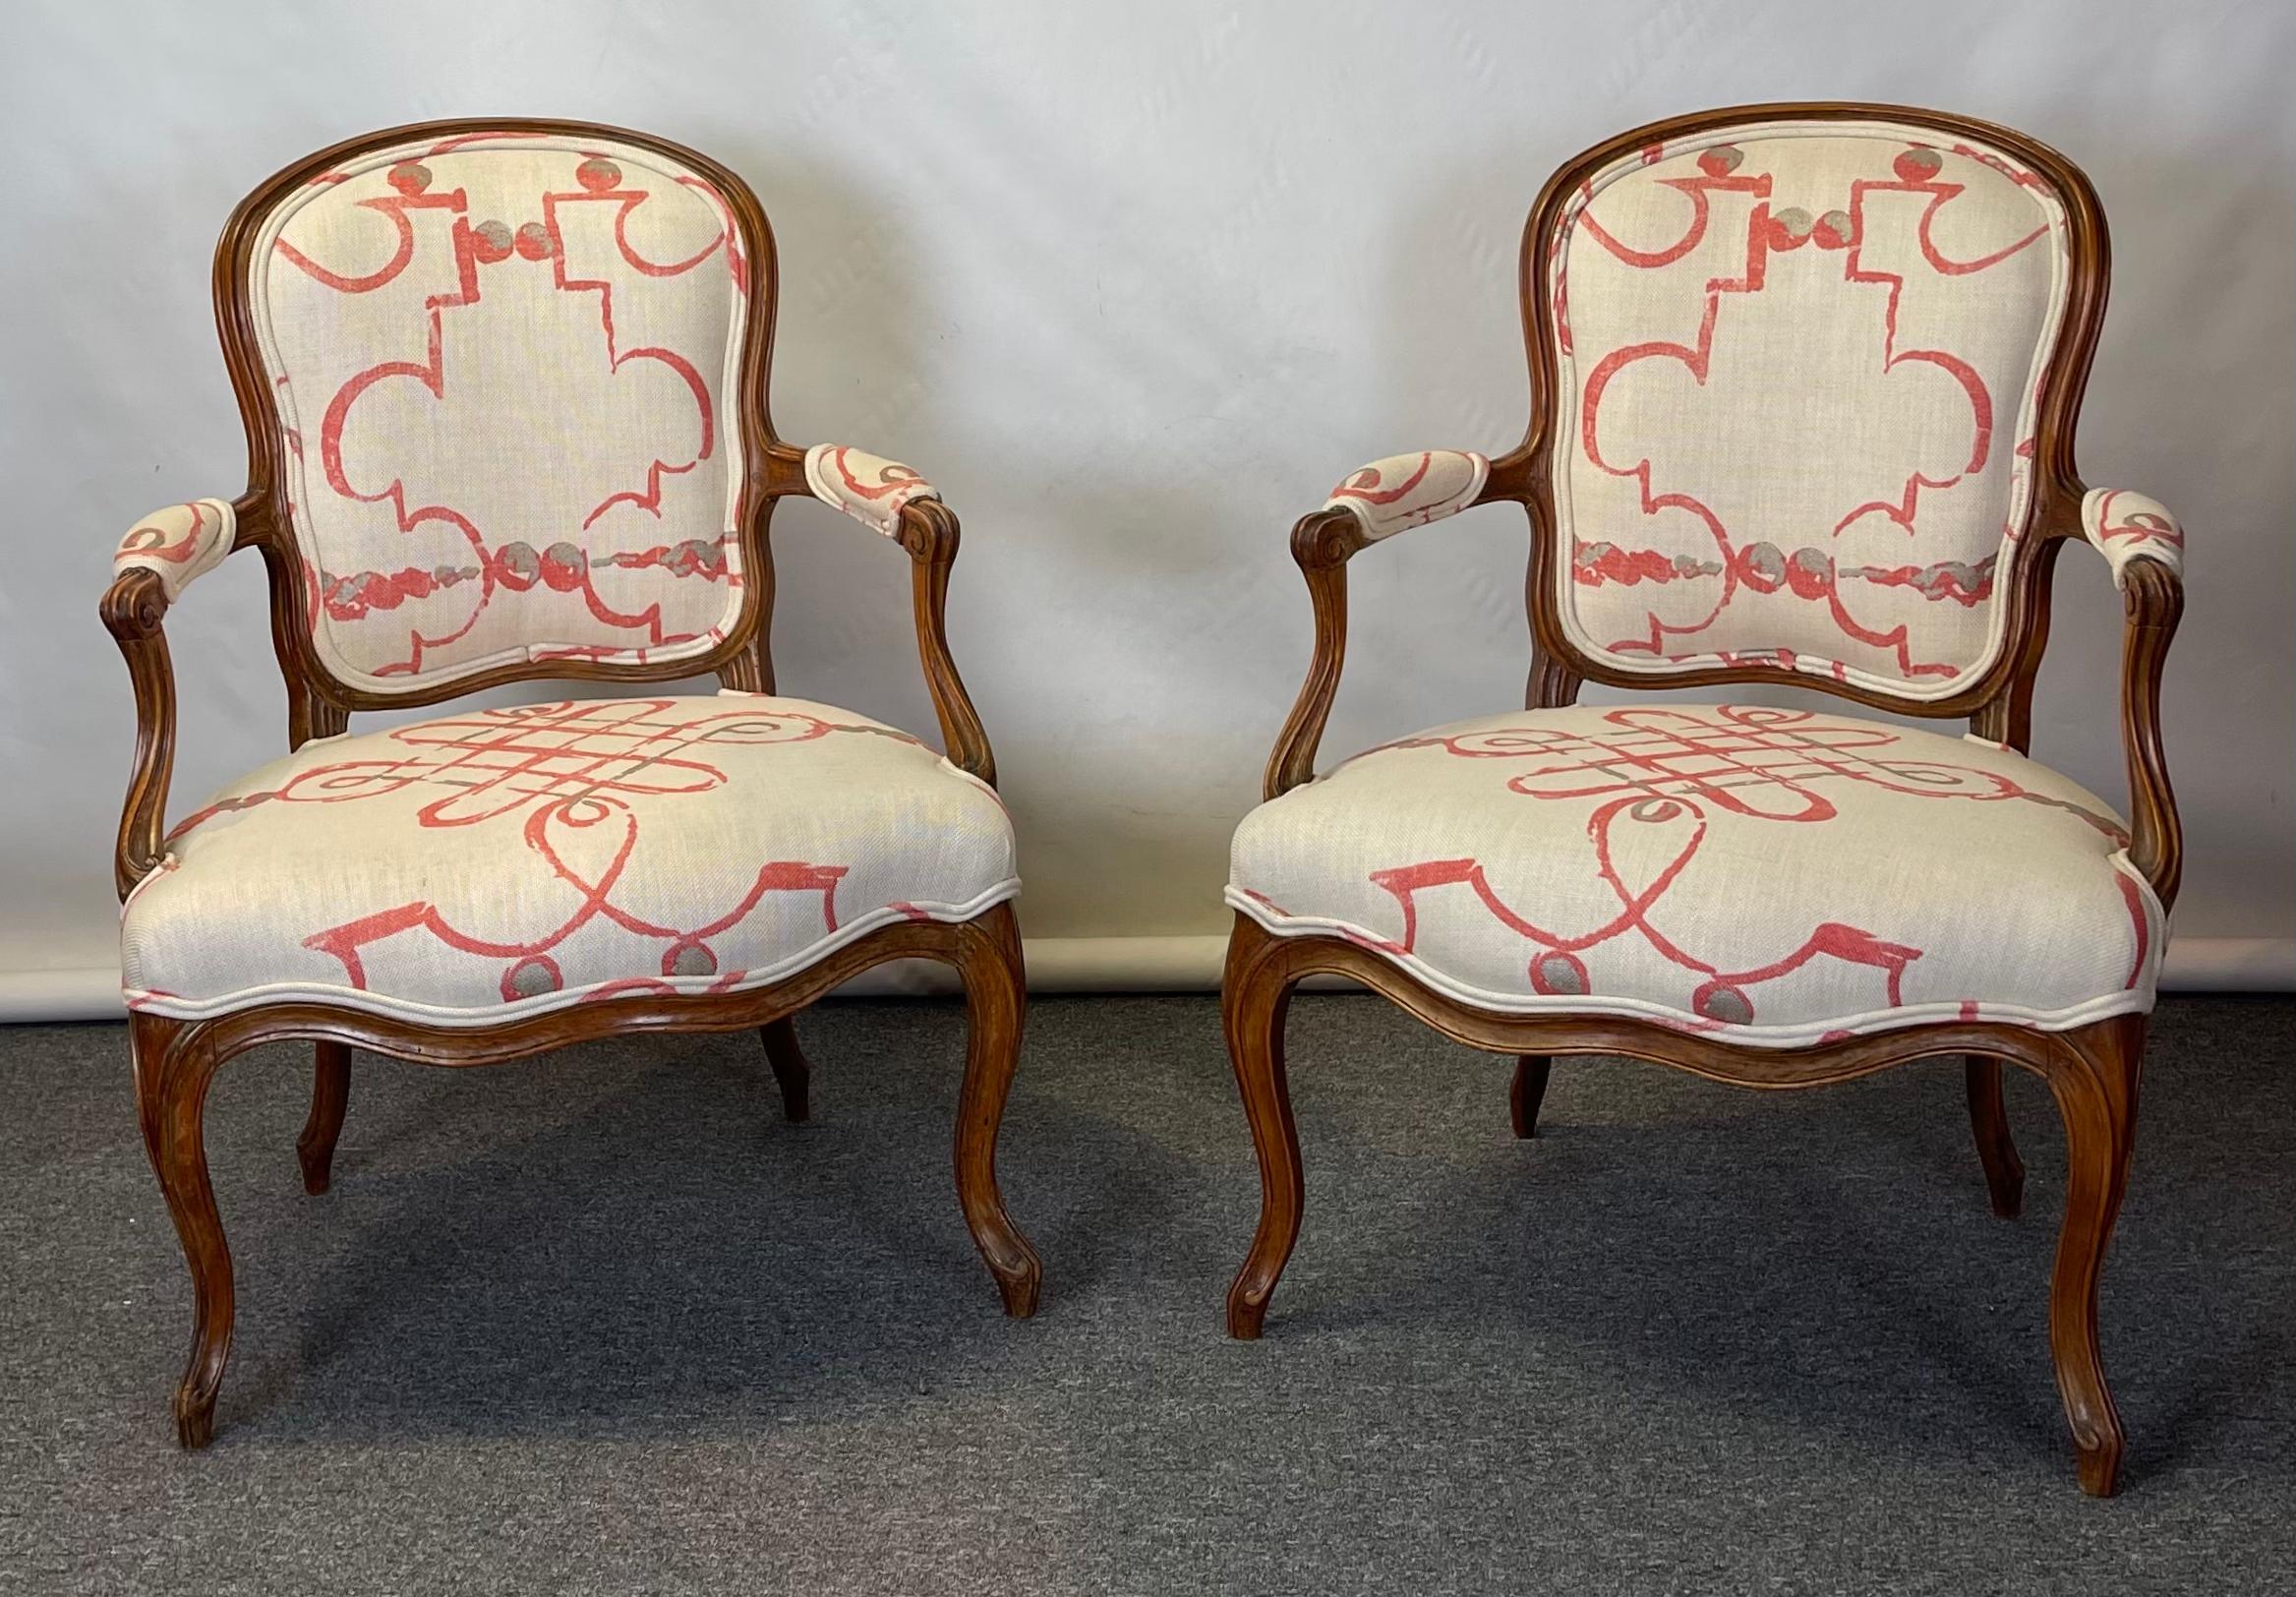 A pair of large and comfortable Louis XVI carved walnut fauteuils or open arm chairs covered in Osbourne & Little's Portavo linen fabric by Nina Campbell.